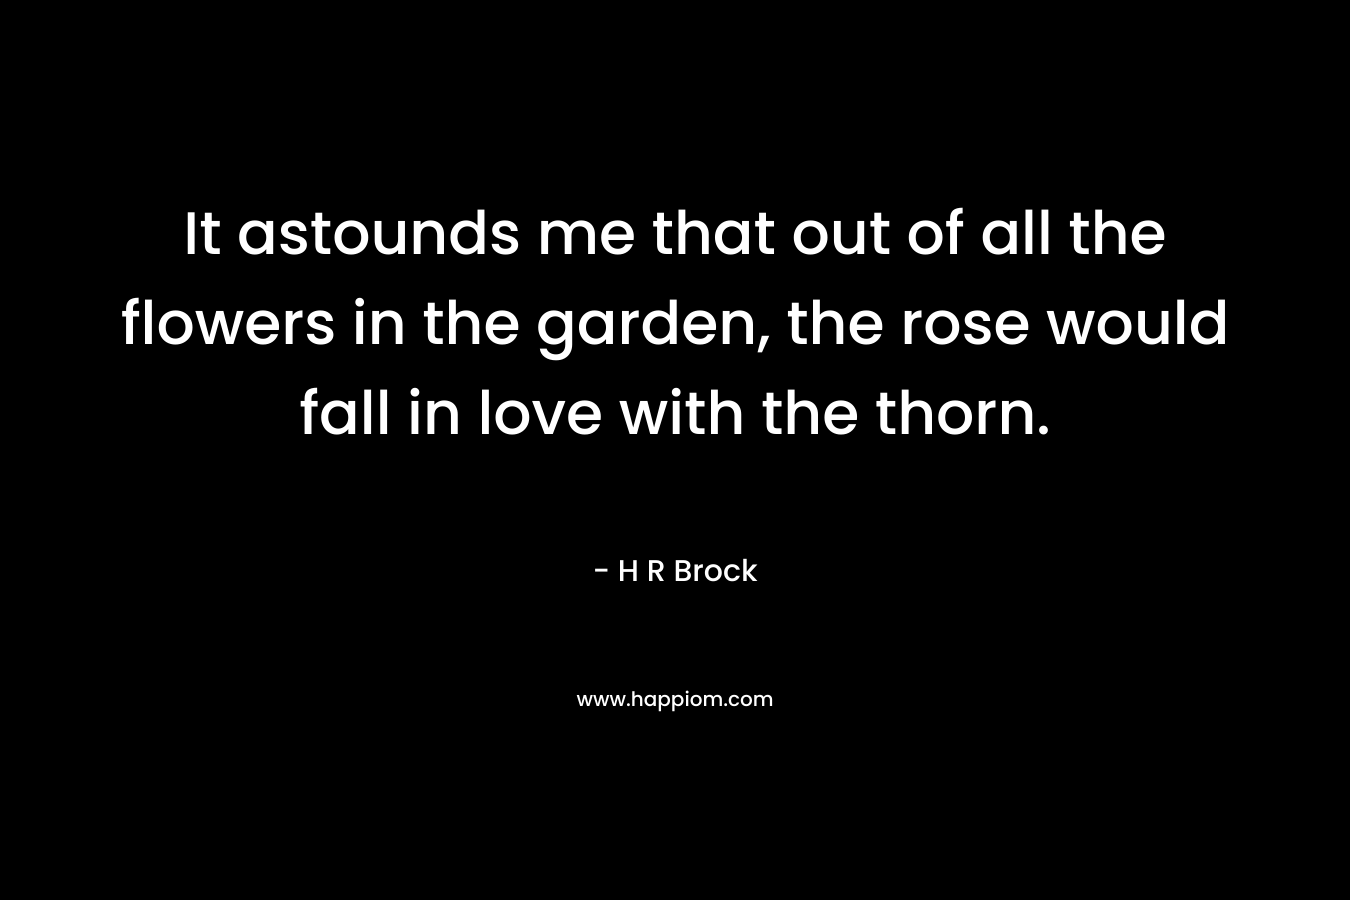 It astounds me that out of all the flowers in the garden, the rose would fall in love with the thorn.